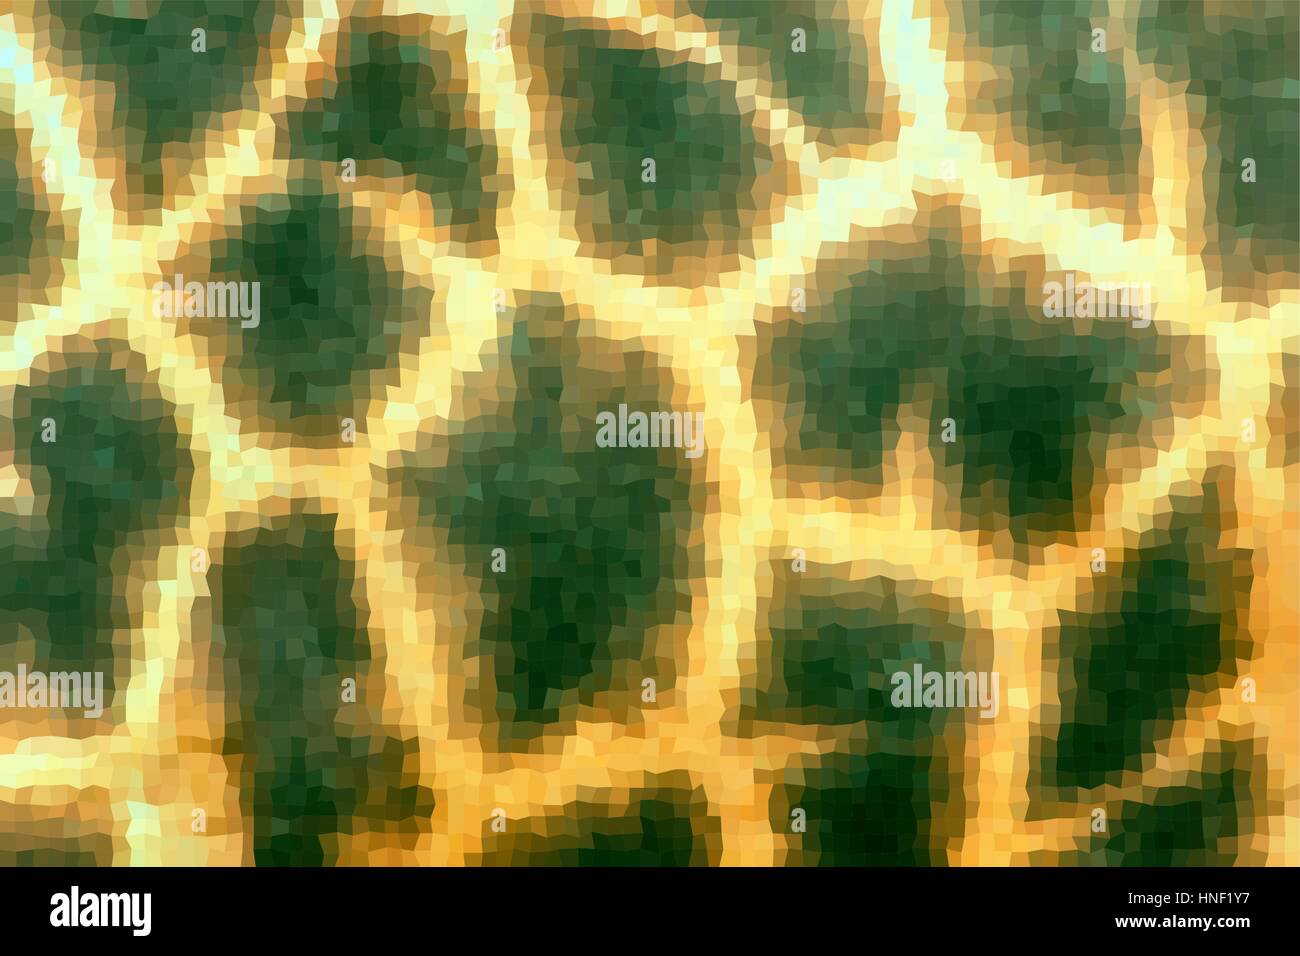 Abstract low poly animal giraffe skin vector background. Nature pattern. Stock Vector